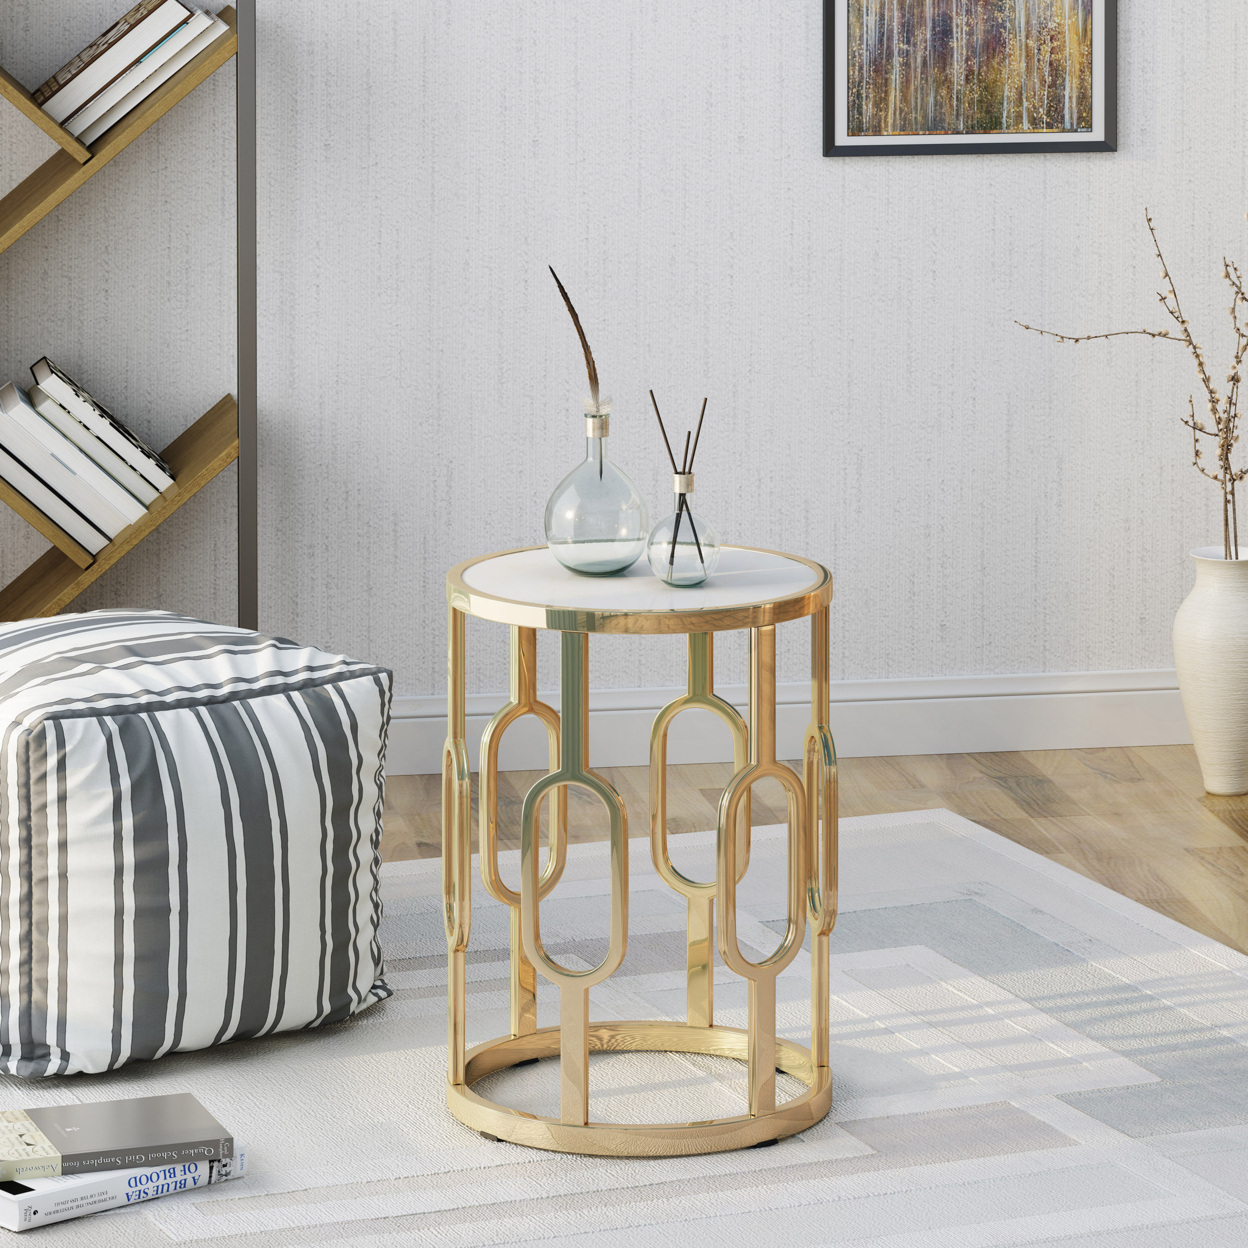 Madison Indoor Glam 16 Inch Side Table, White Finish Faux Stone - image 2 of 7